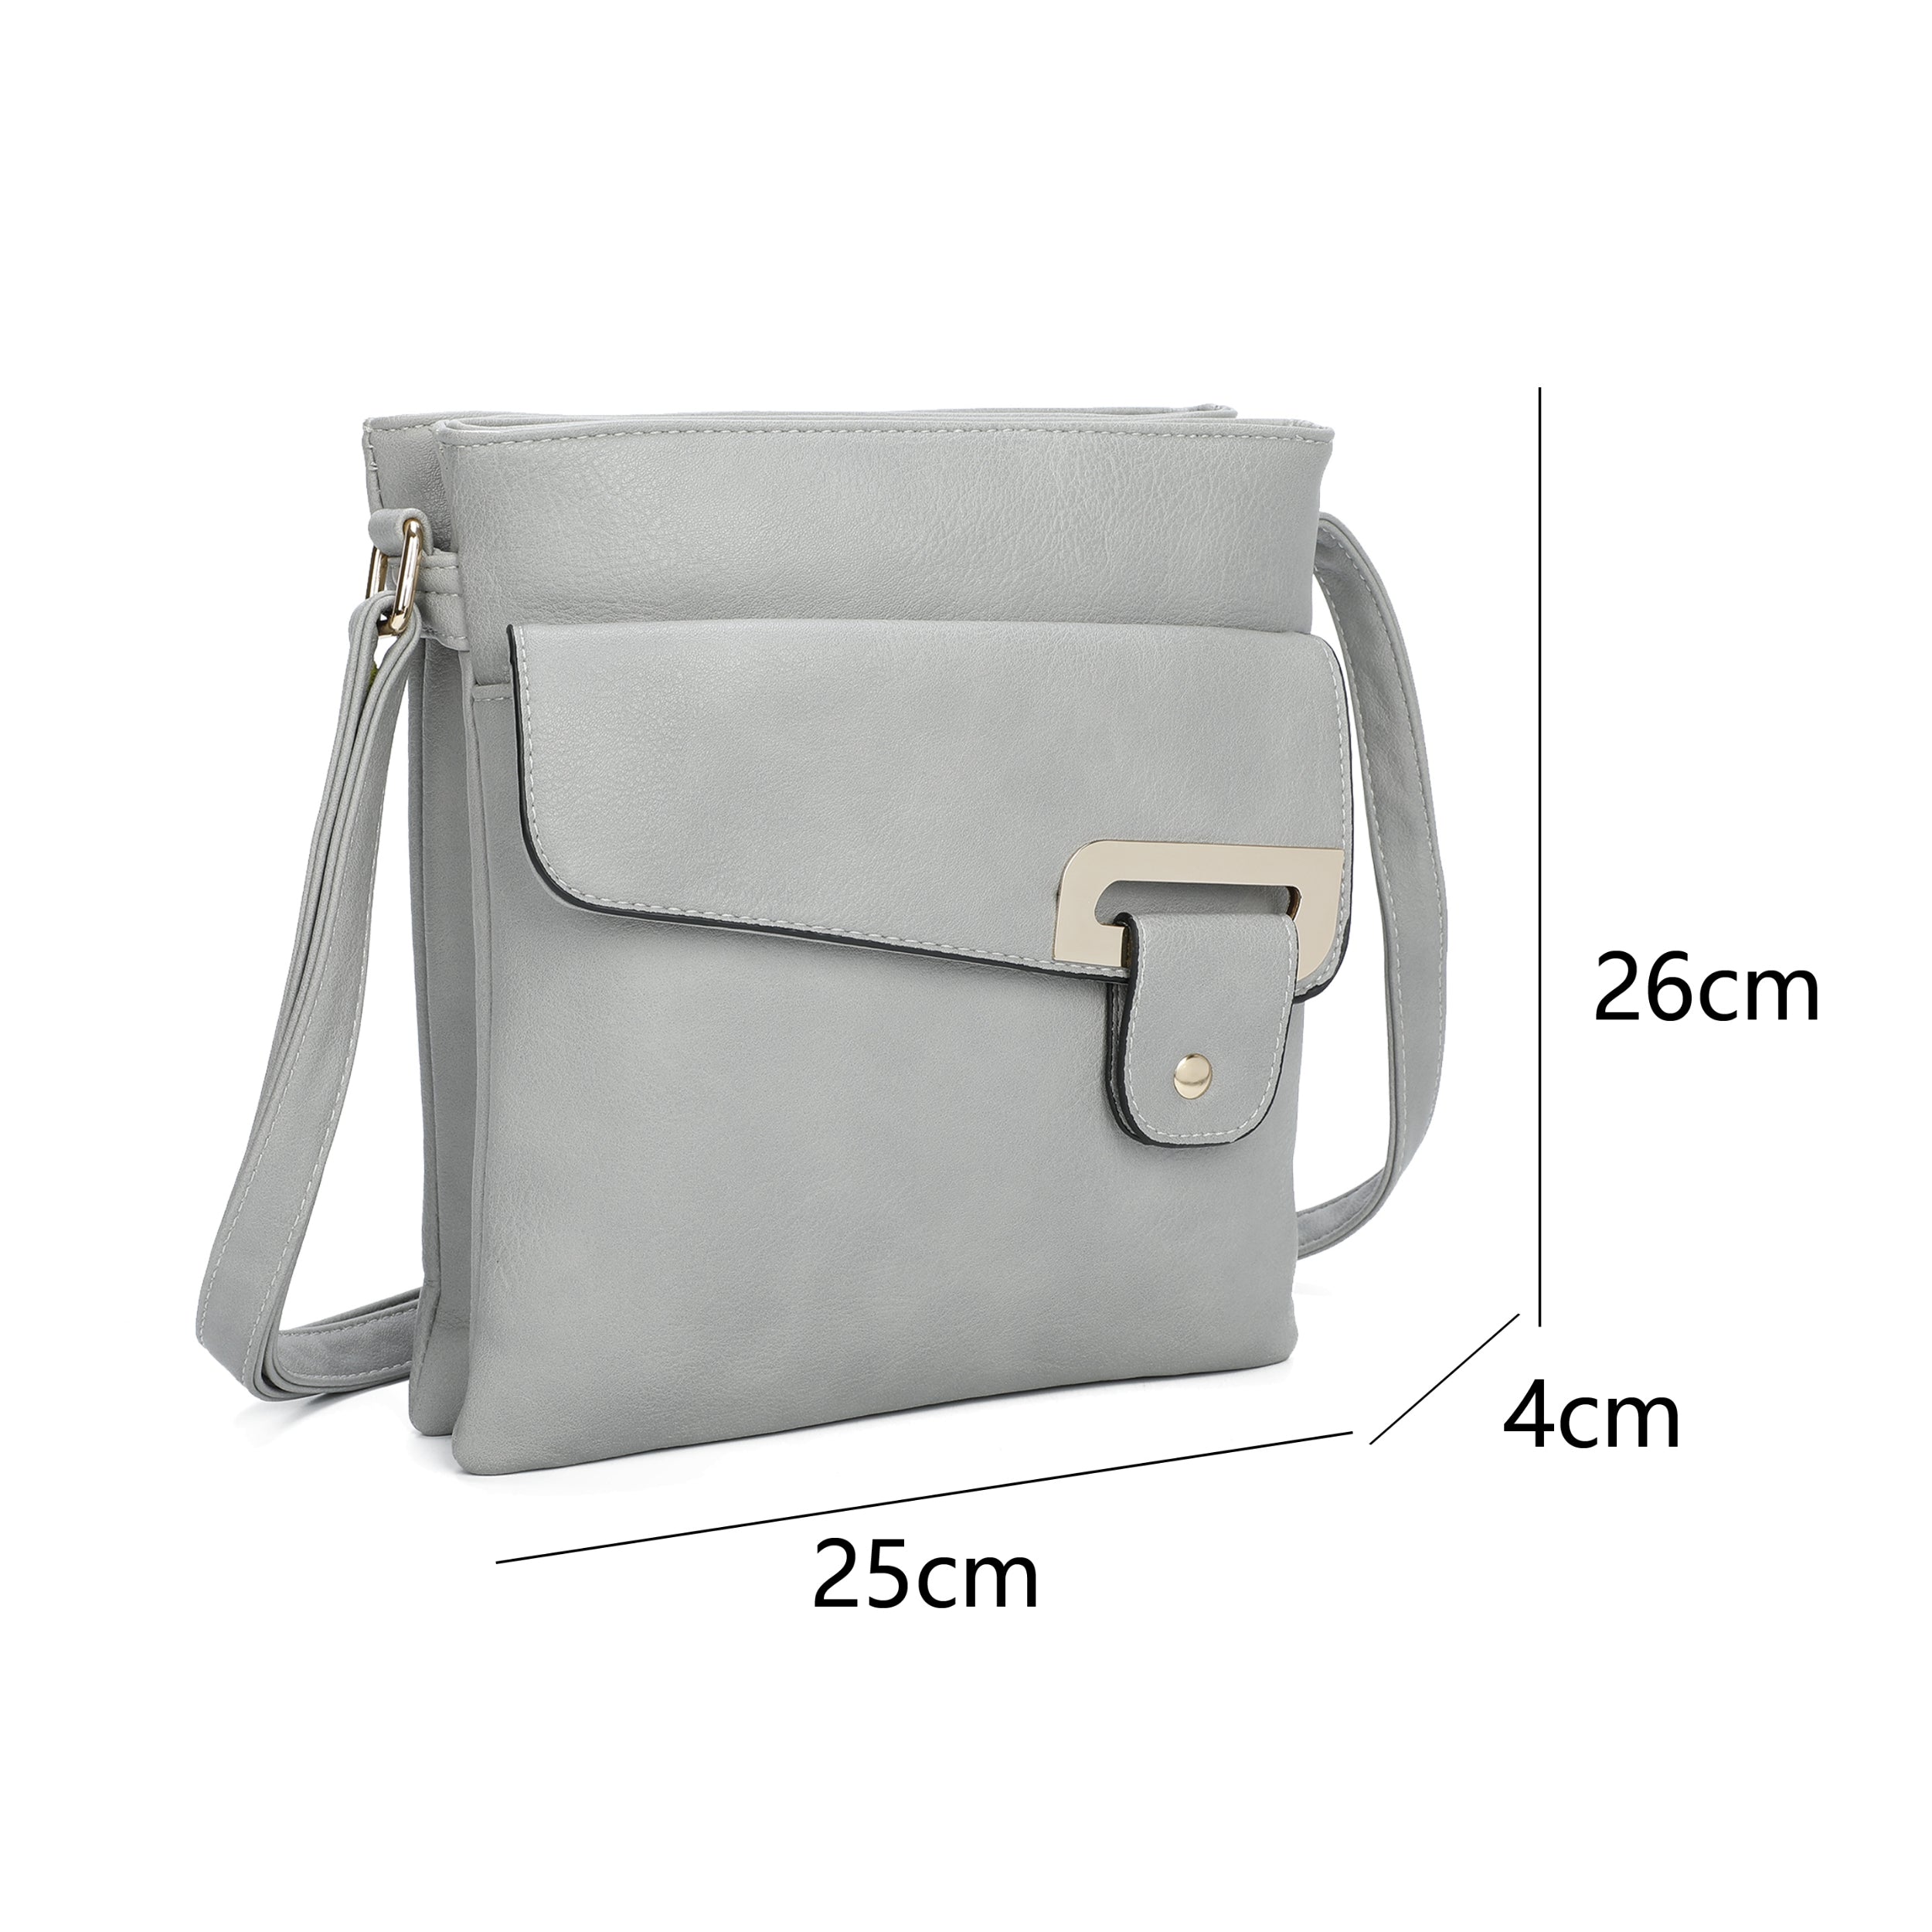 Craze London Crossbody bag with Double Compartments